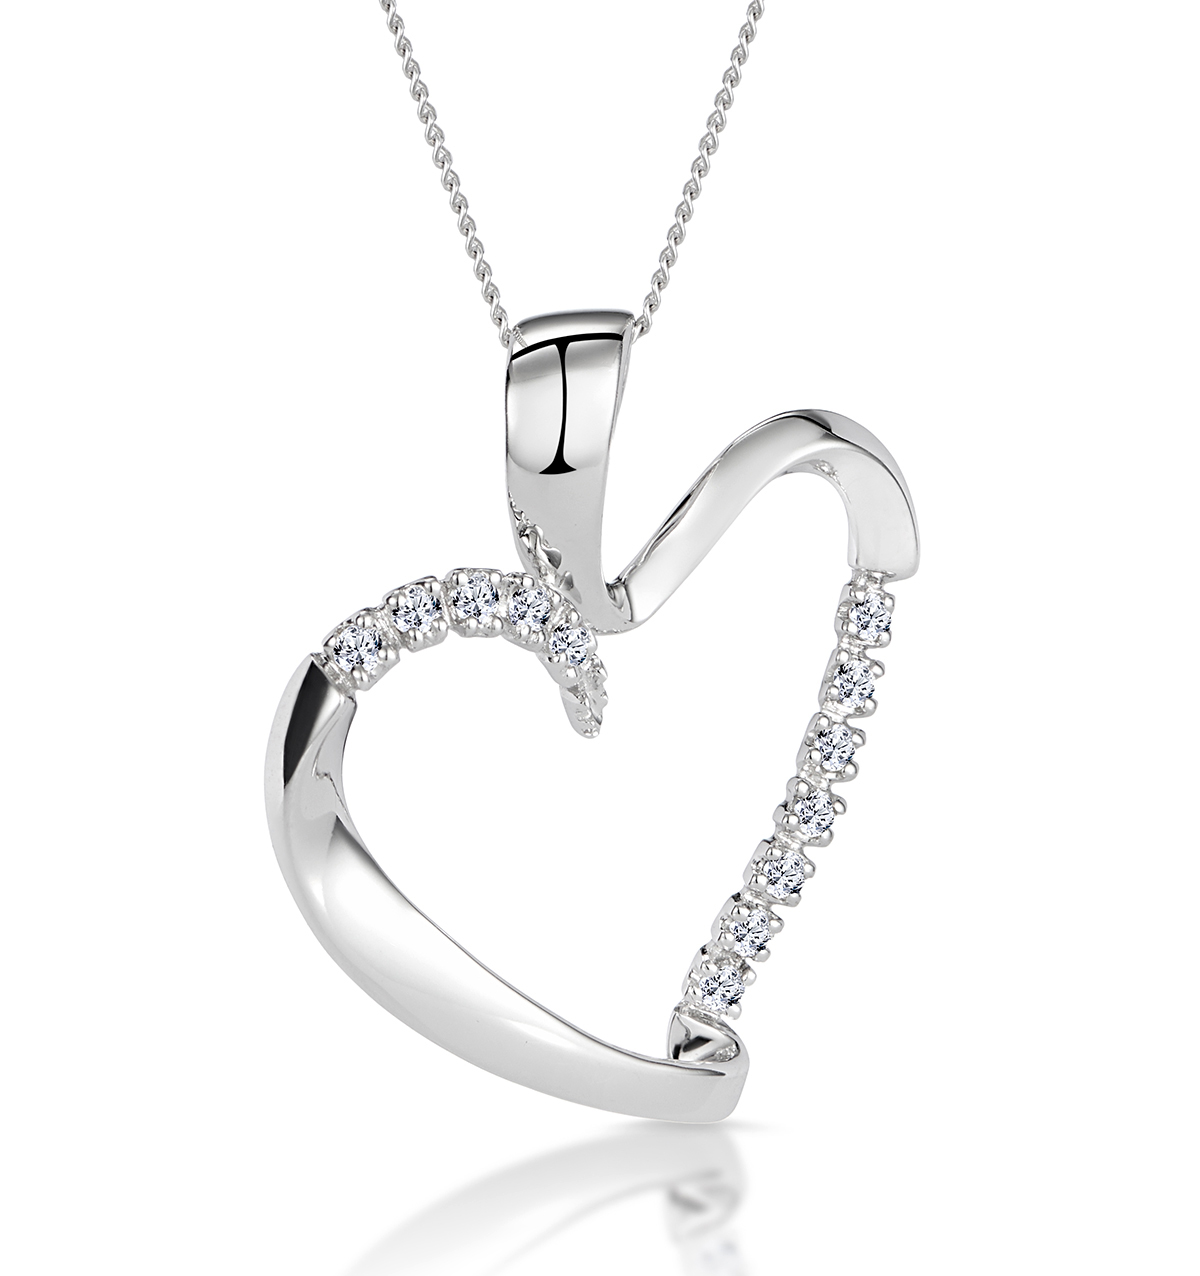 Valentine Special 1/4 CTTW Diamond Heart Necklace Pendant in Sterling Silver By Halo Jewels 